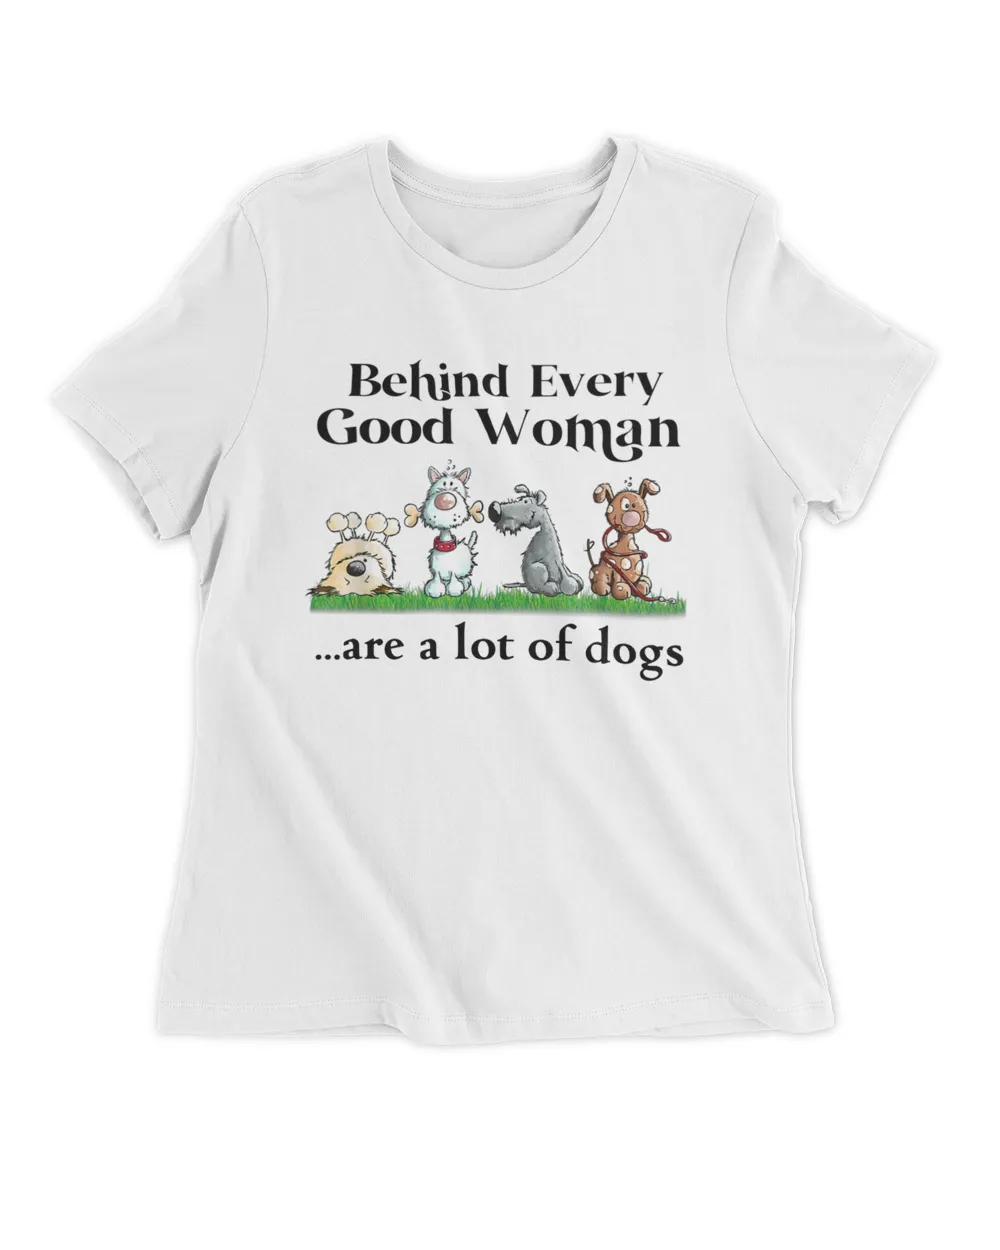 Behind every good woman are a lot of dogs 1